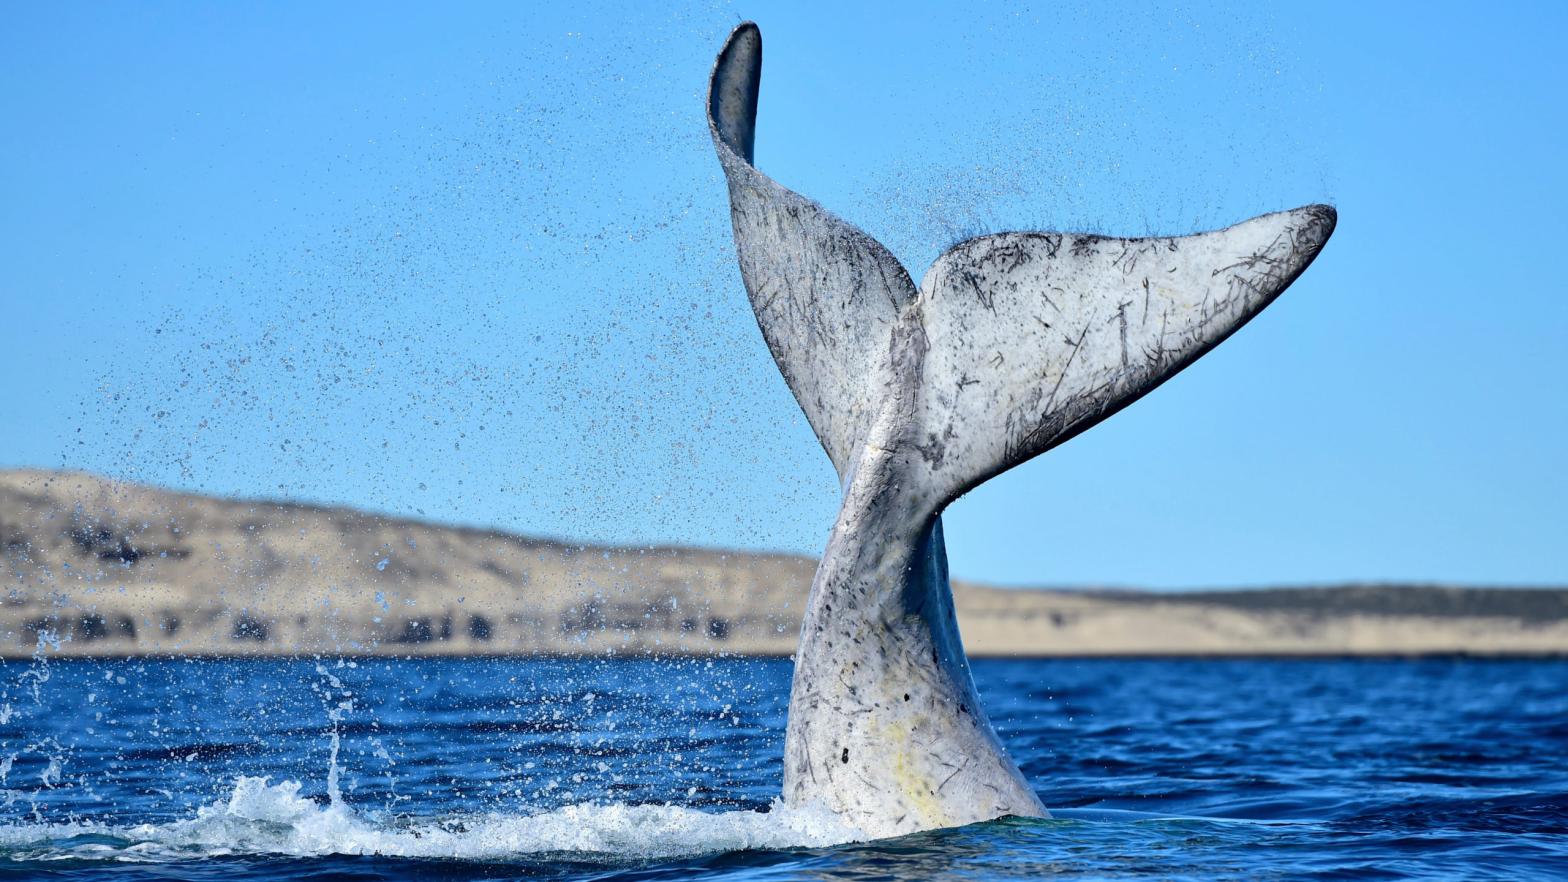 The tail of a Southern right whale breaking the water surface in El Doradillo Beach, Argentina. (Photo: Maxi Jonas, AP)